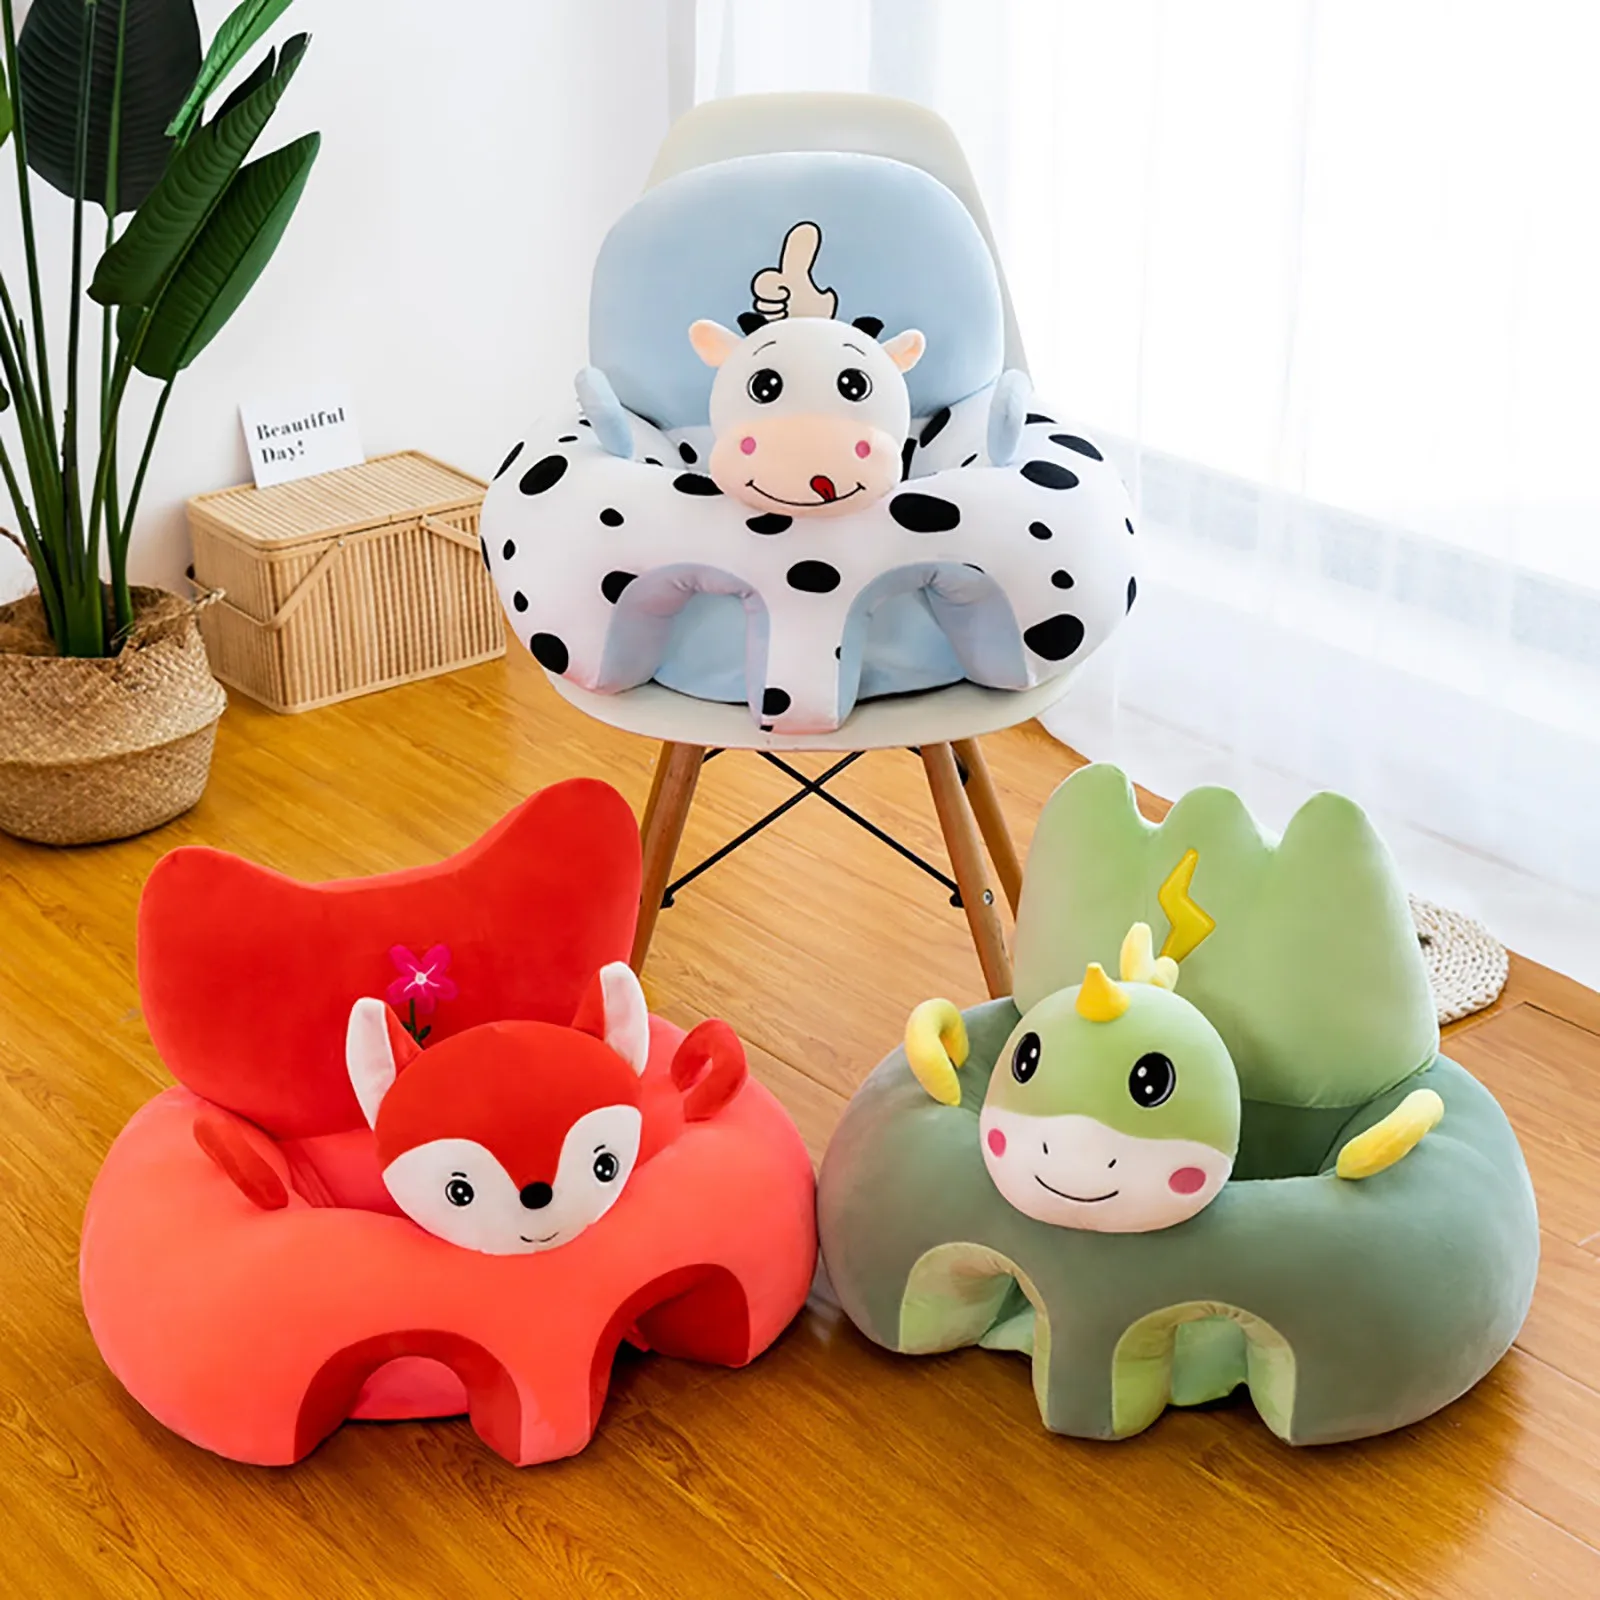 2022 New Style Children Chair Animal Shape Sofa Cartoon Plush Toy Learning Seat Learning Baby Portable Filled With Cotton